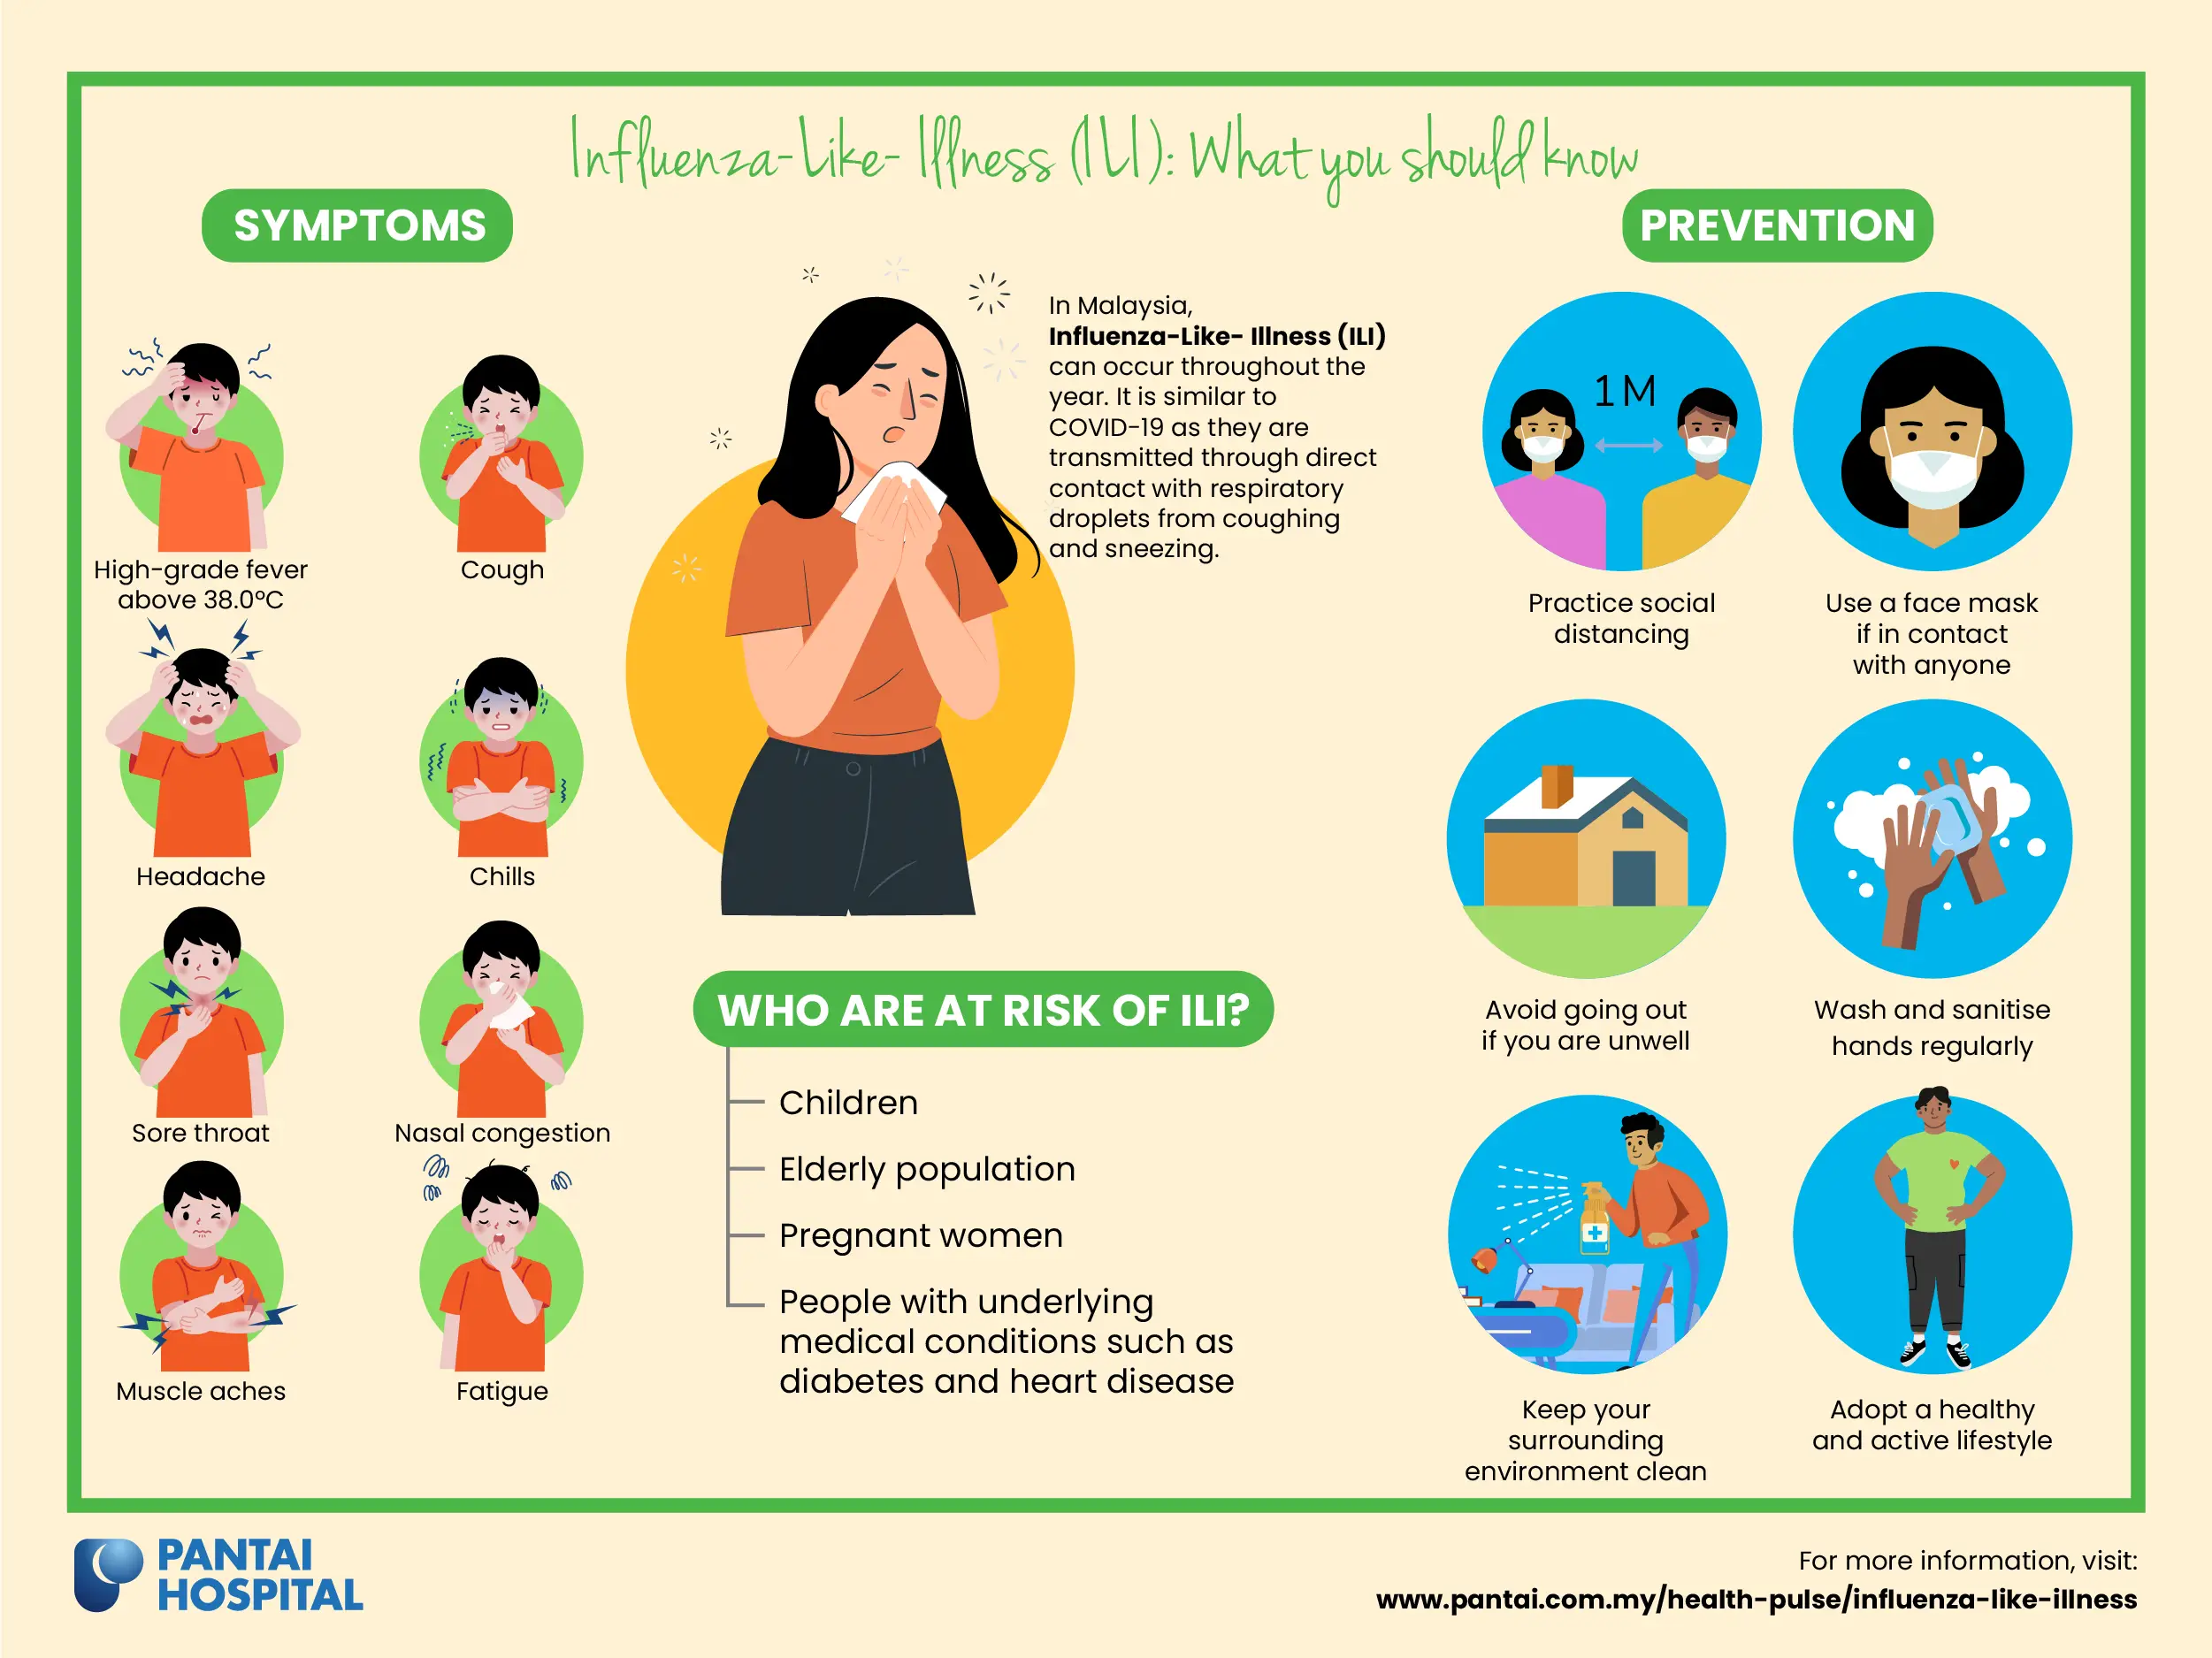 Infographic showing influenza symptoms in Malaysia, who are at risk of influenza-like-illness (ILI), and steps you can take to prevent ILI